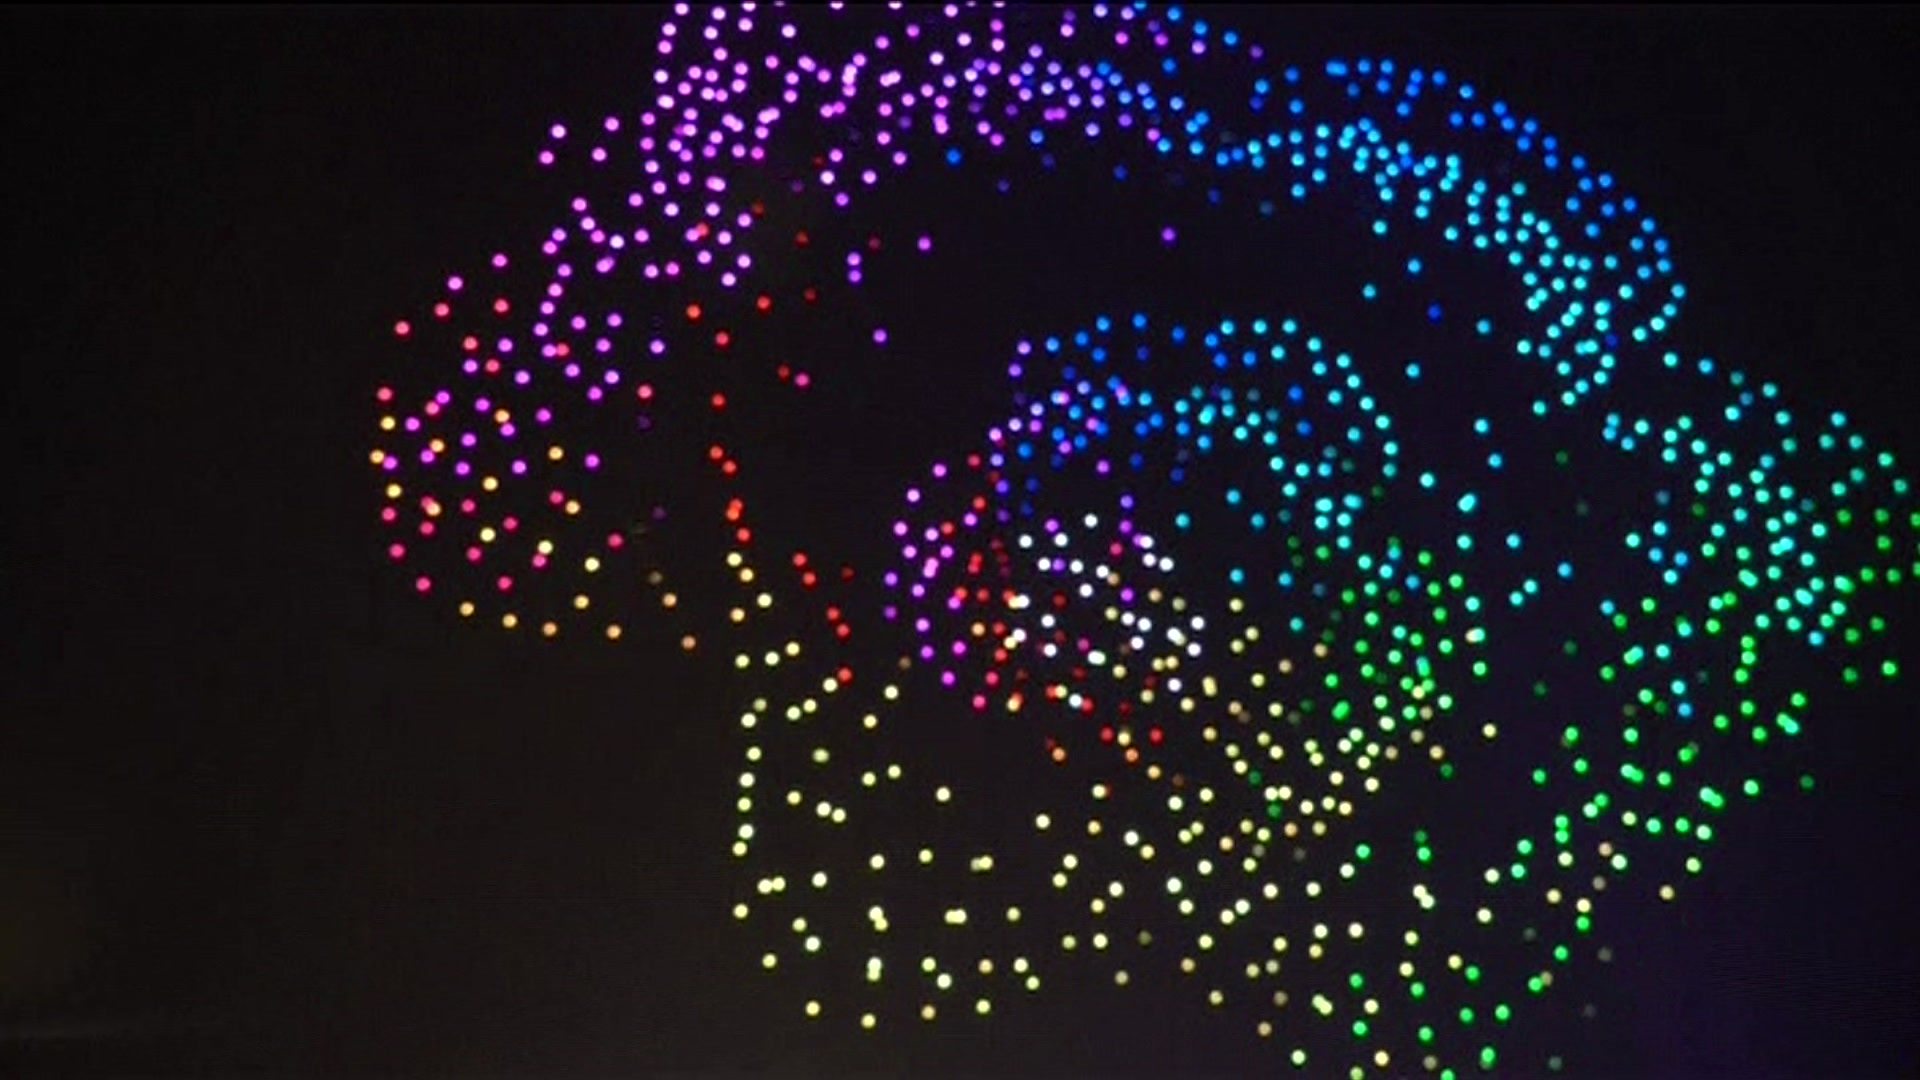 Drone light show in China breaks world record - BBC News